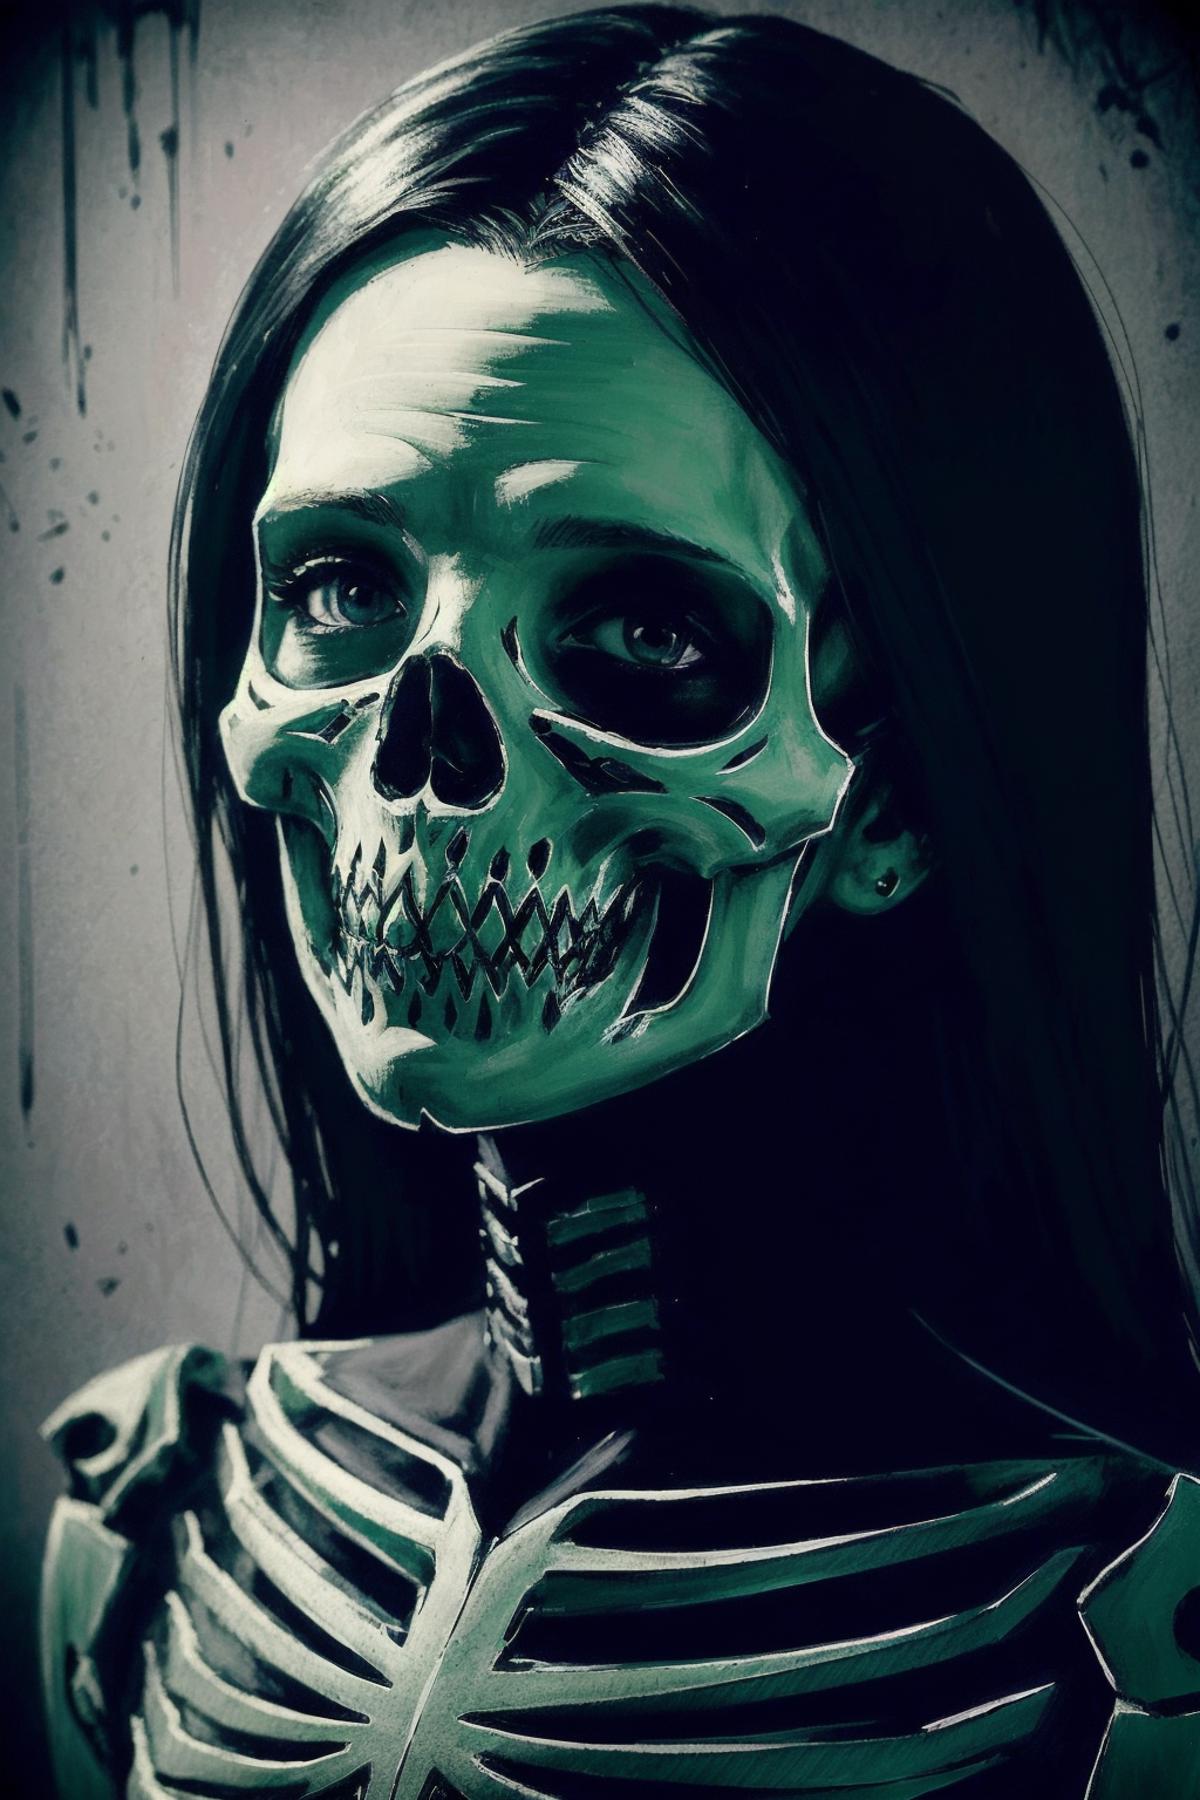 A woman with a green skeleton face, wearing a black top and a necklace.